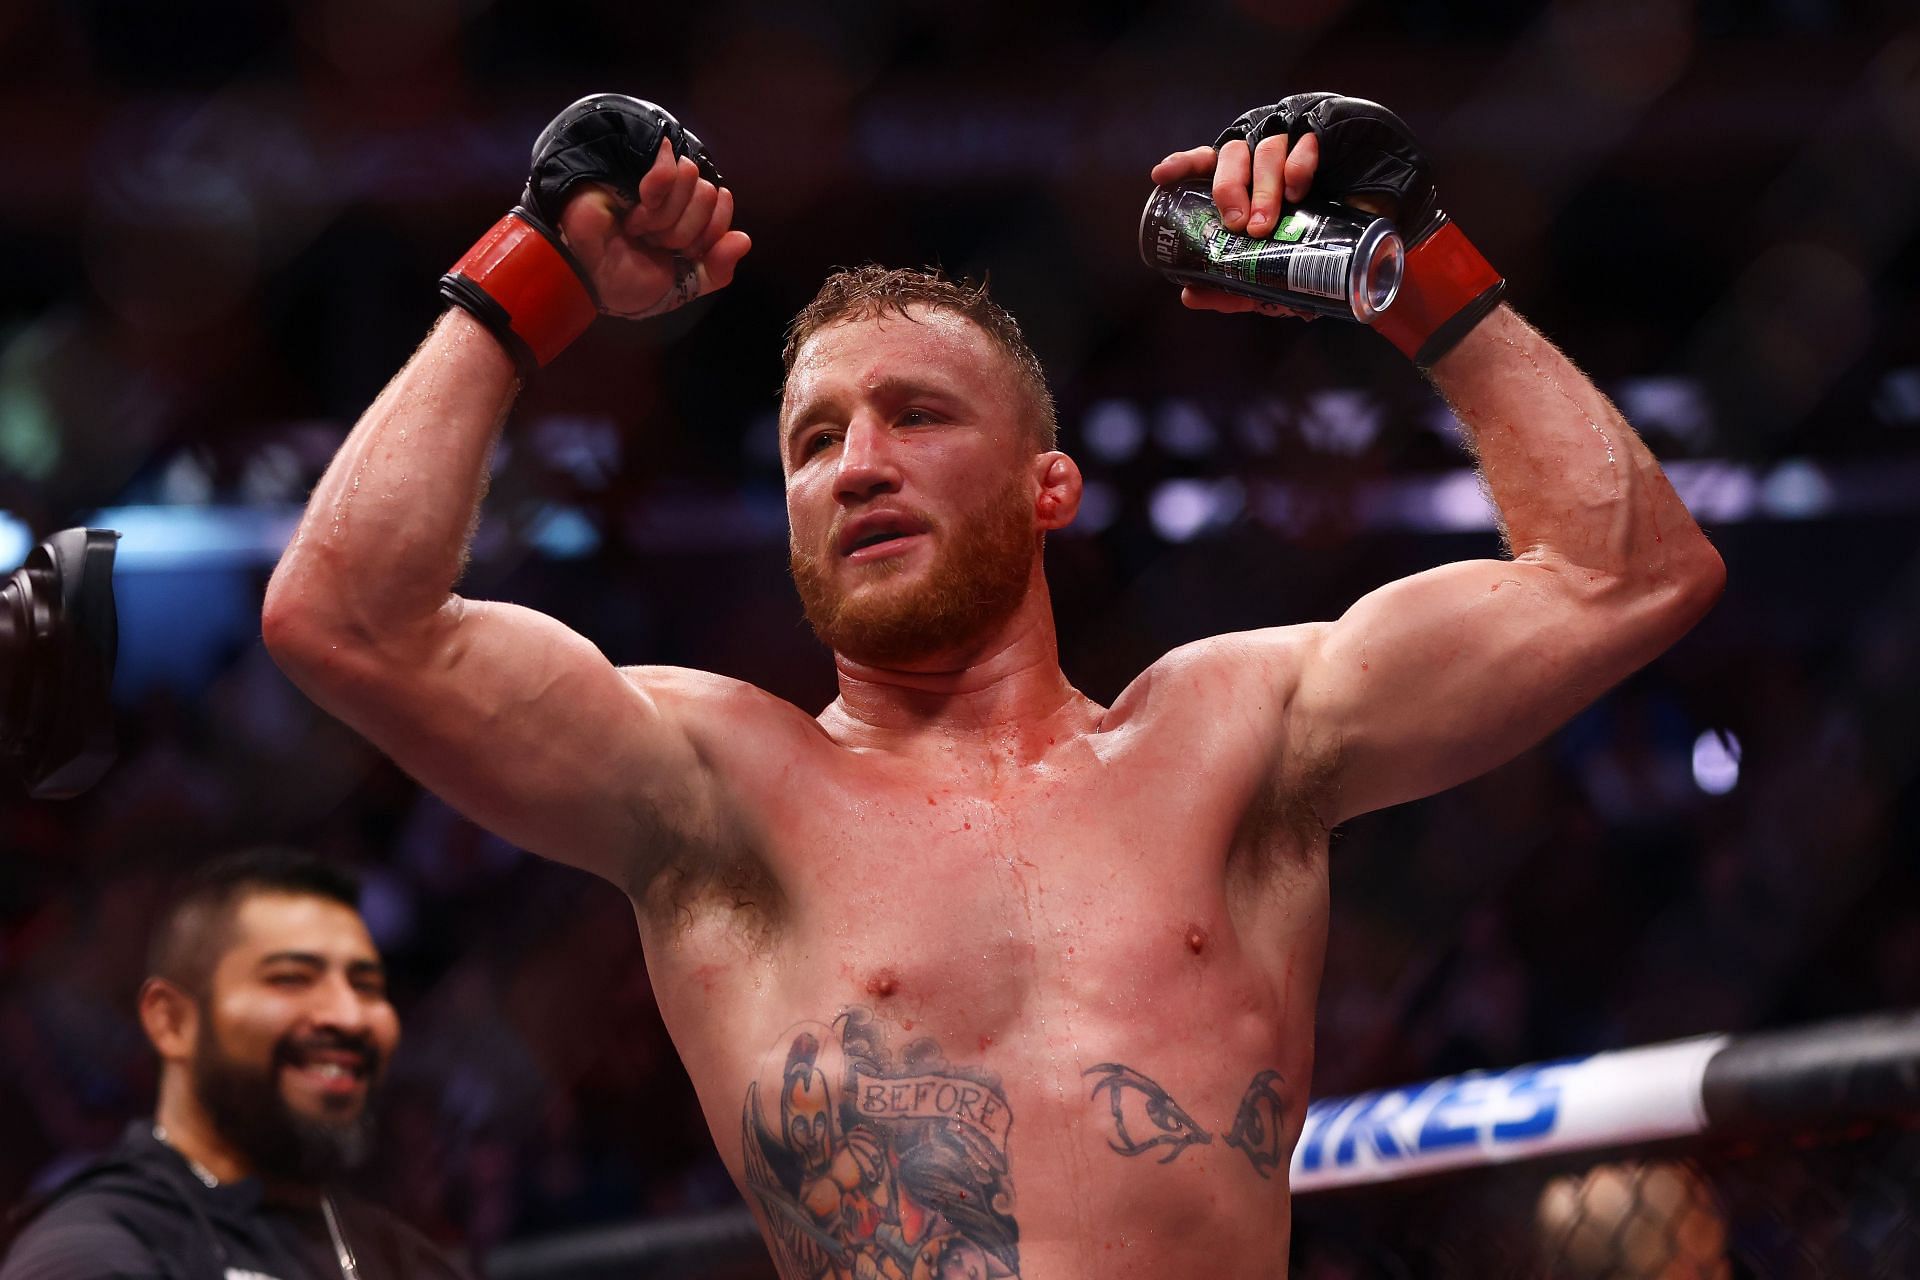 Justin Gaethje may be the most exciting fighter on the roster right now